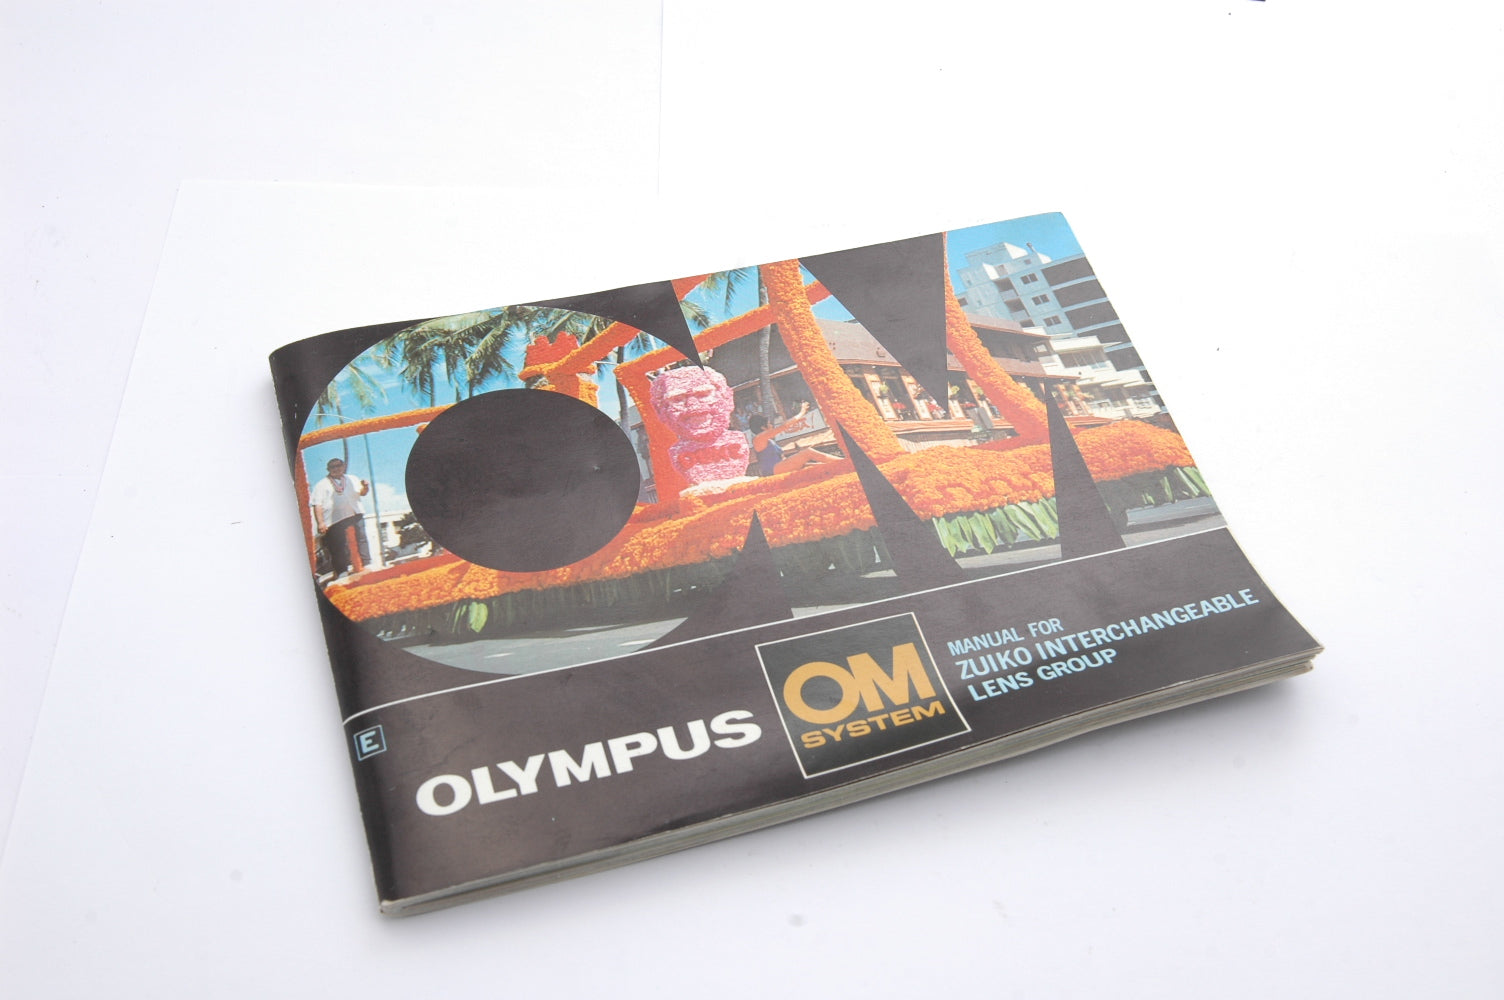 Used Olympus System Manual for Zuiko Interchangeable Lenses Booklet